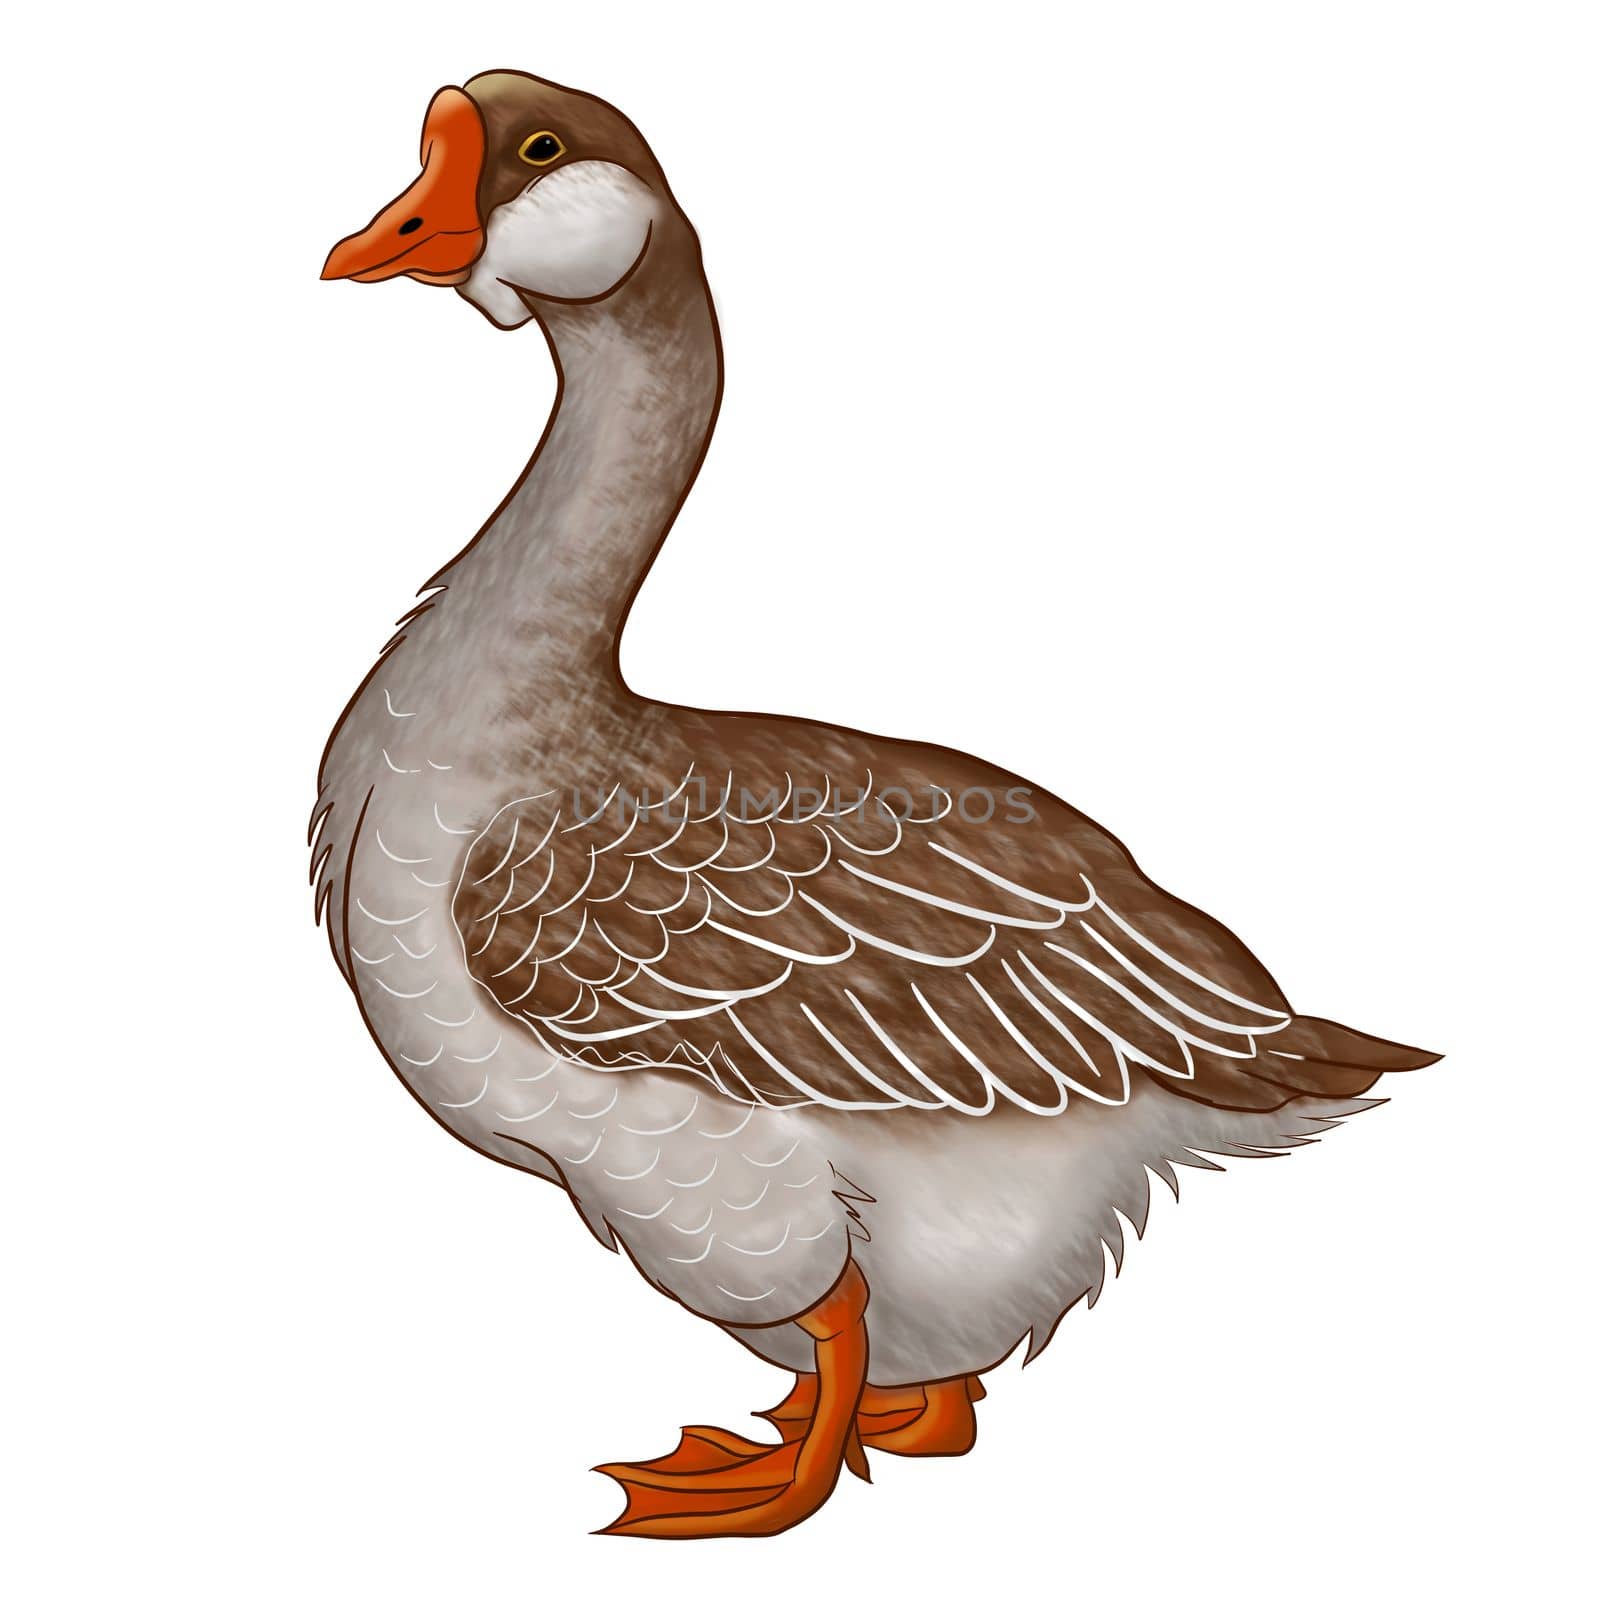 Illustration of a goose on an isolated background. Clip art animals.